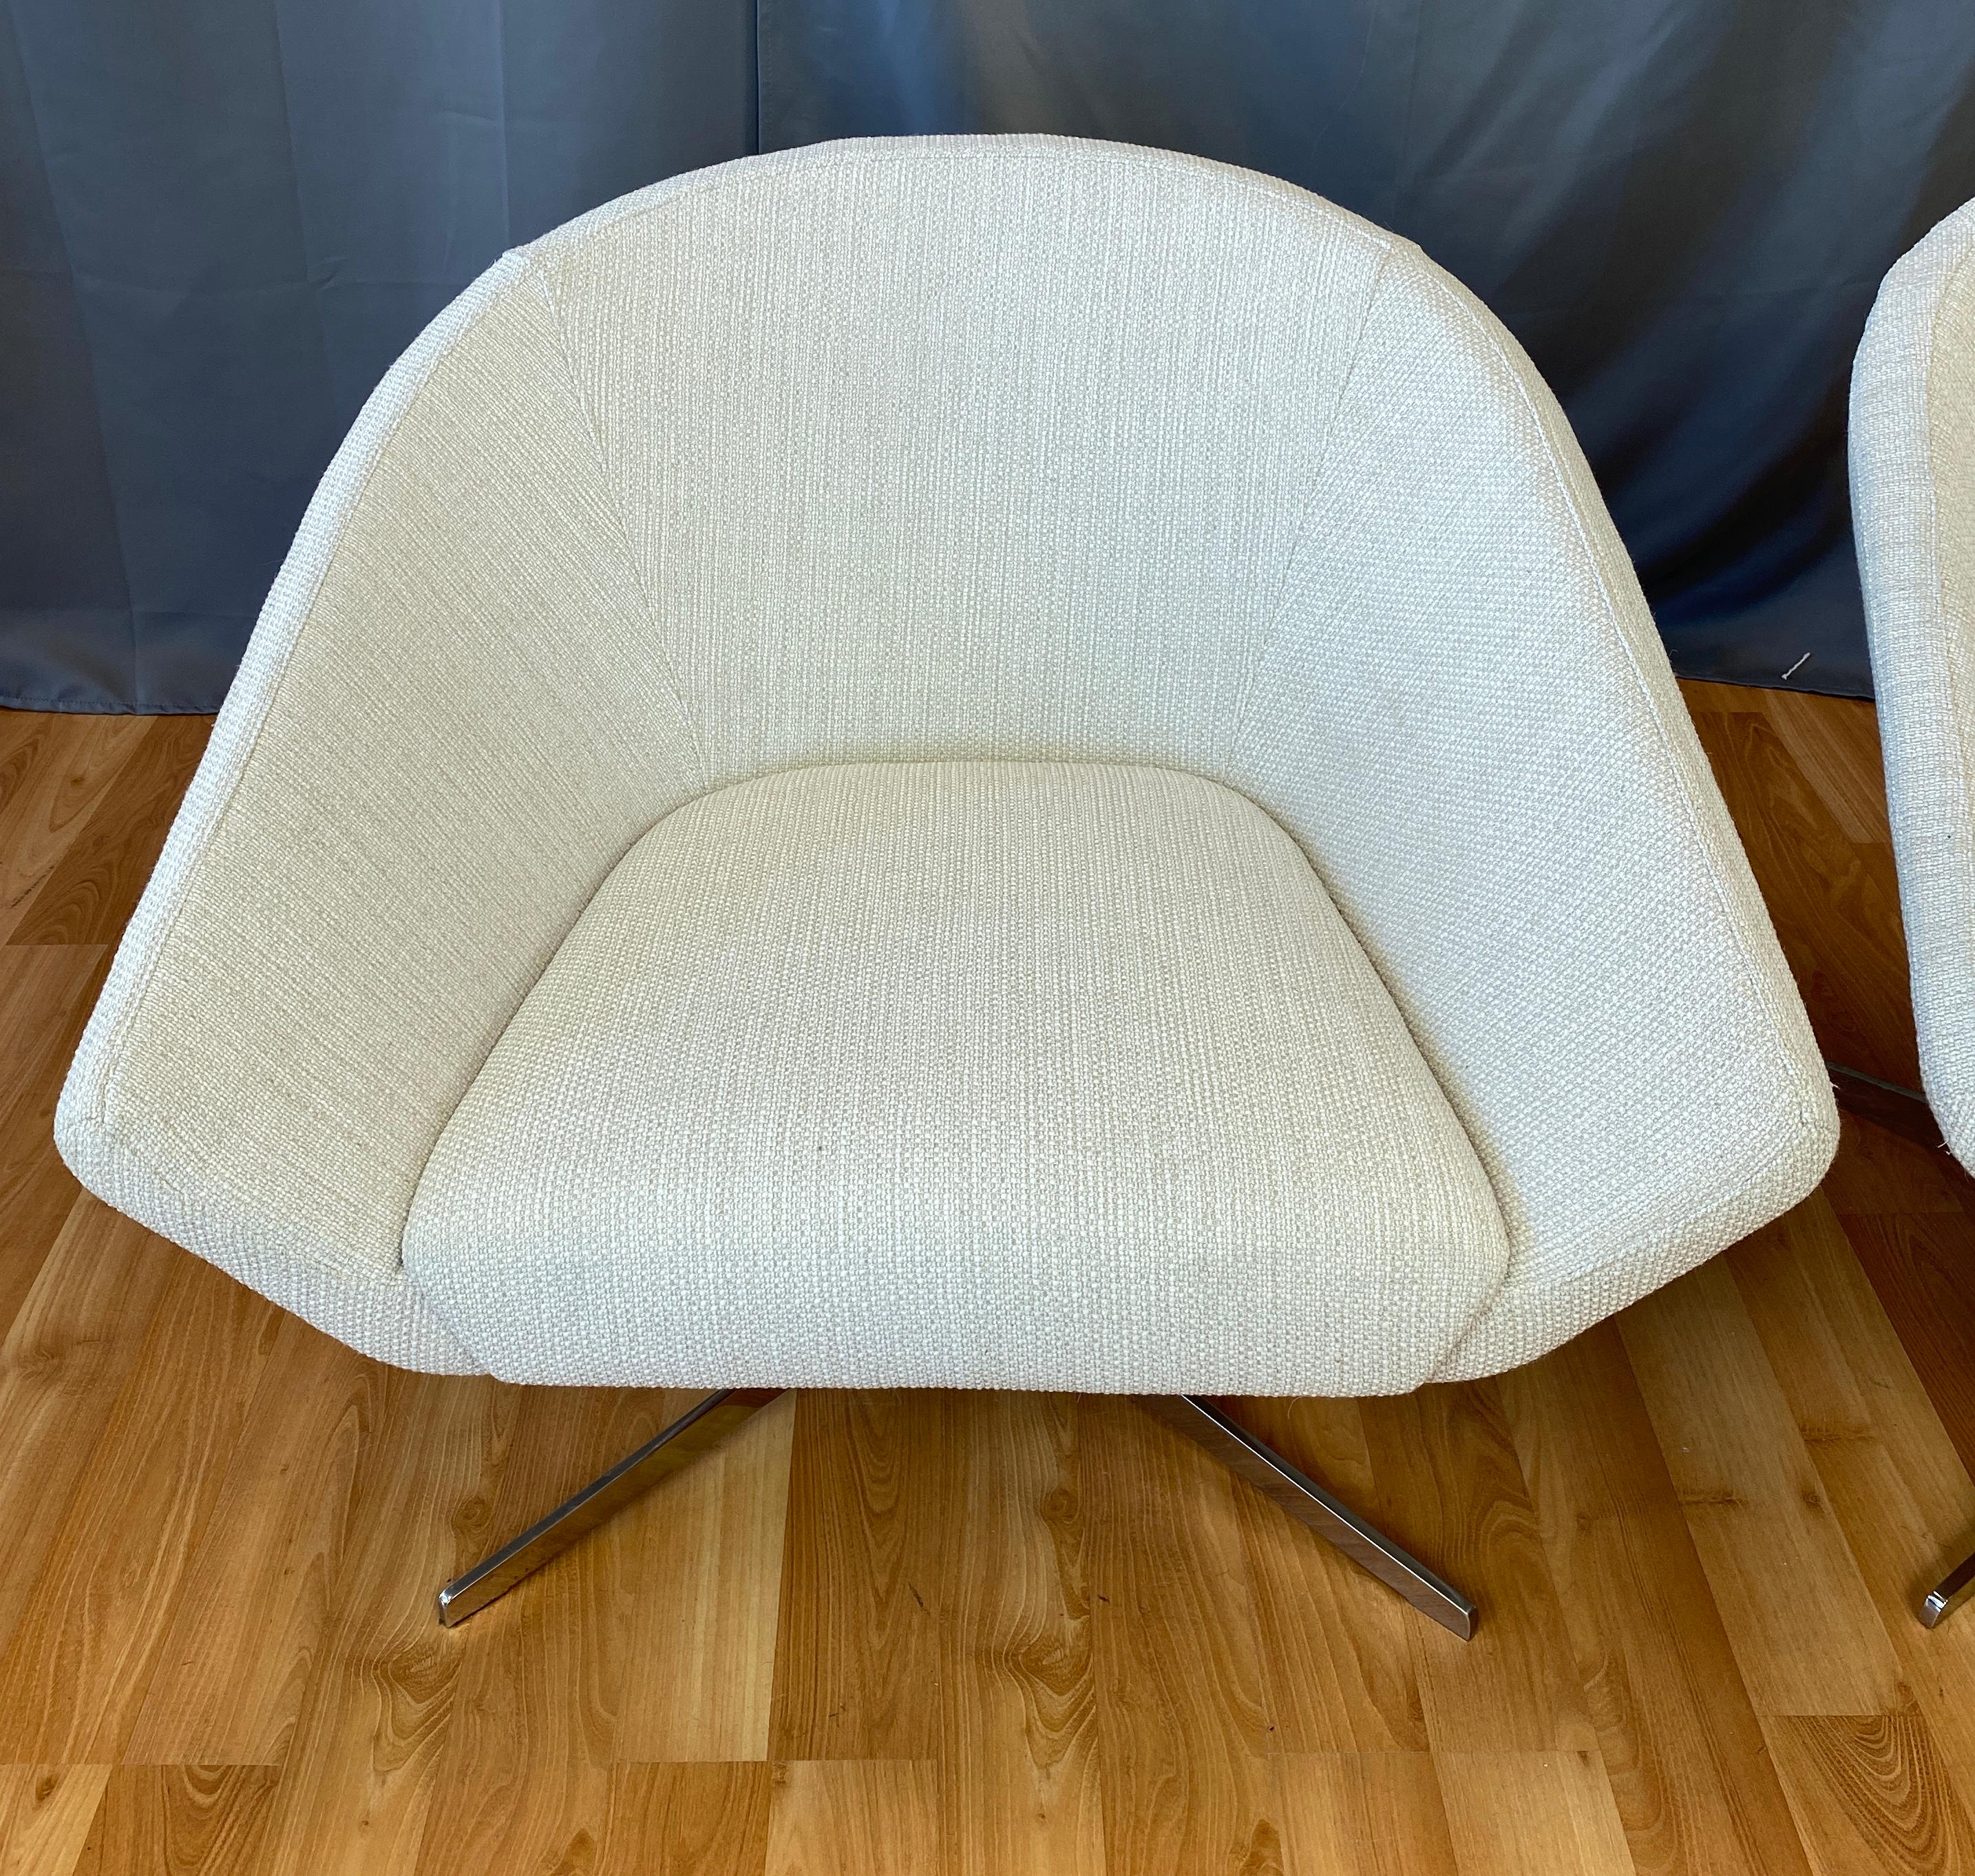 American Pair of Remy Lounge Chairs by Jeffrey Bernett for Bernhardt Design